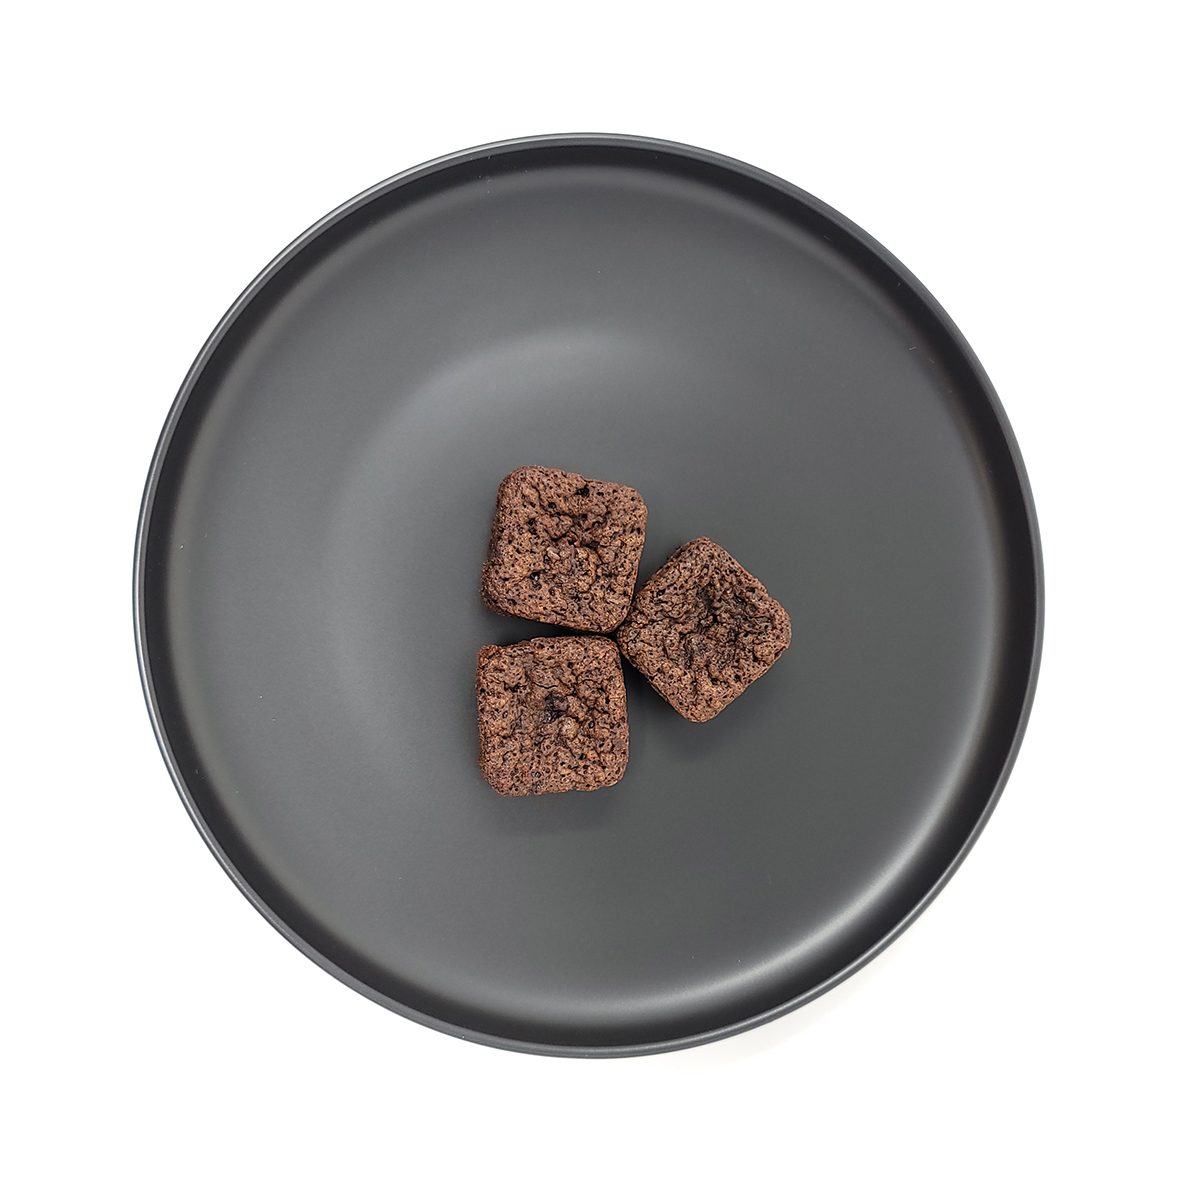 Snapdragon Hemp Extra Strength Delta 8 Infused Brownie On Black Plate